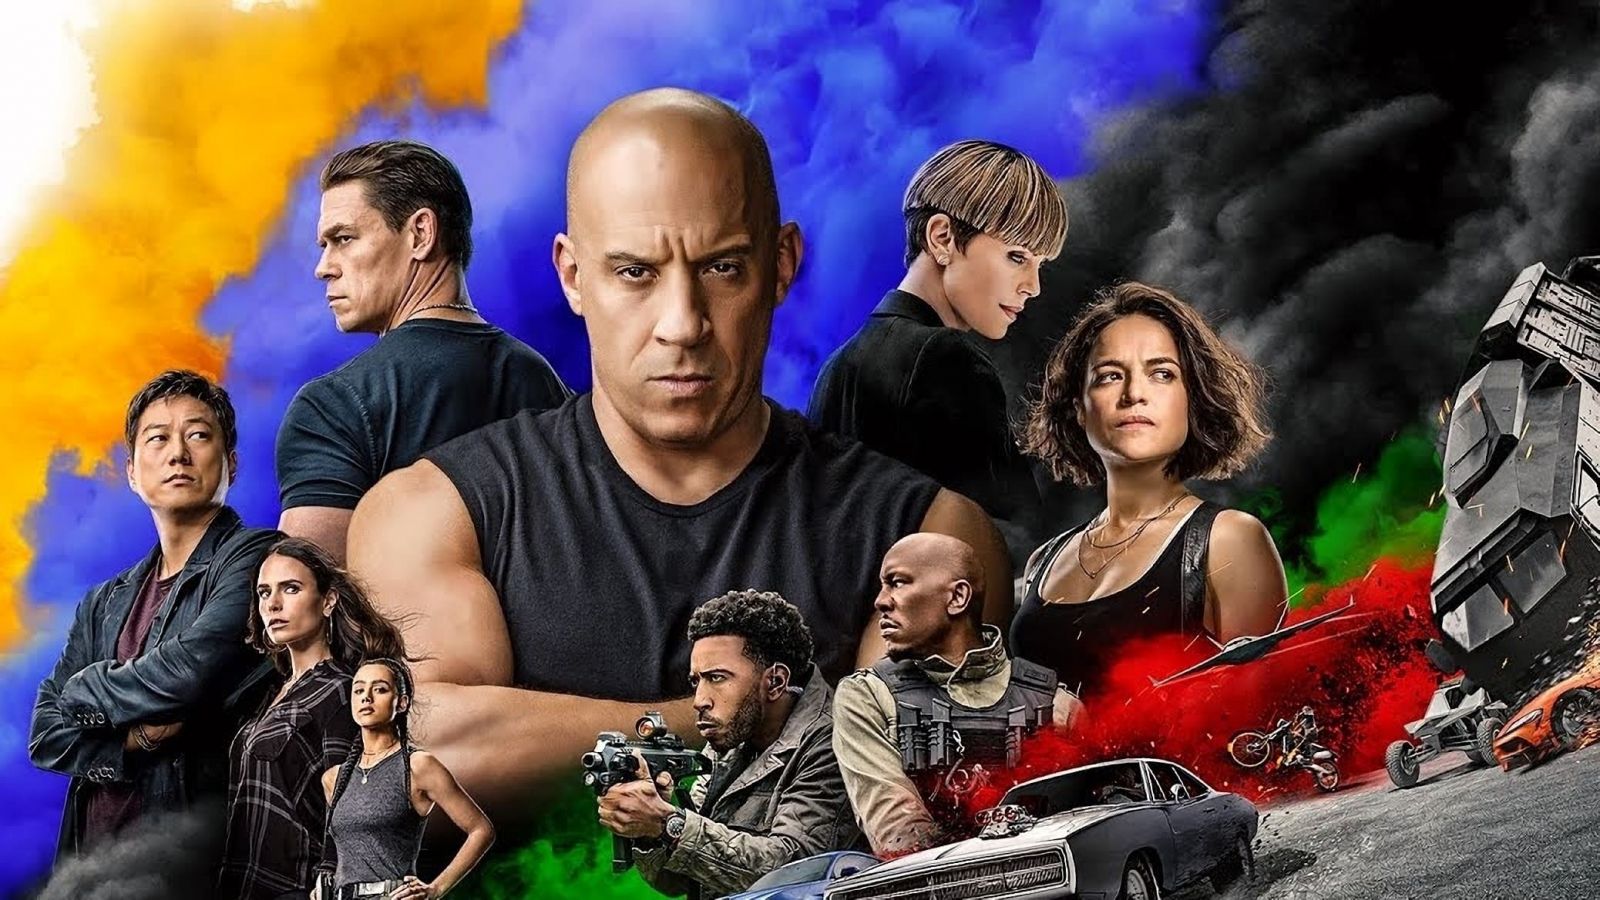 Fast and Furious 9 (2021) Full HD Full Movies English Language Watch Online Free